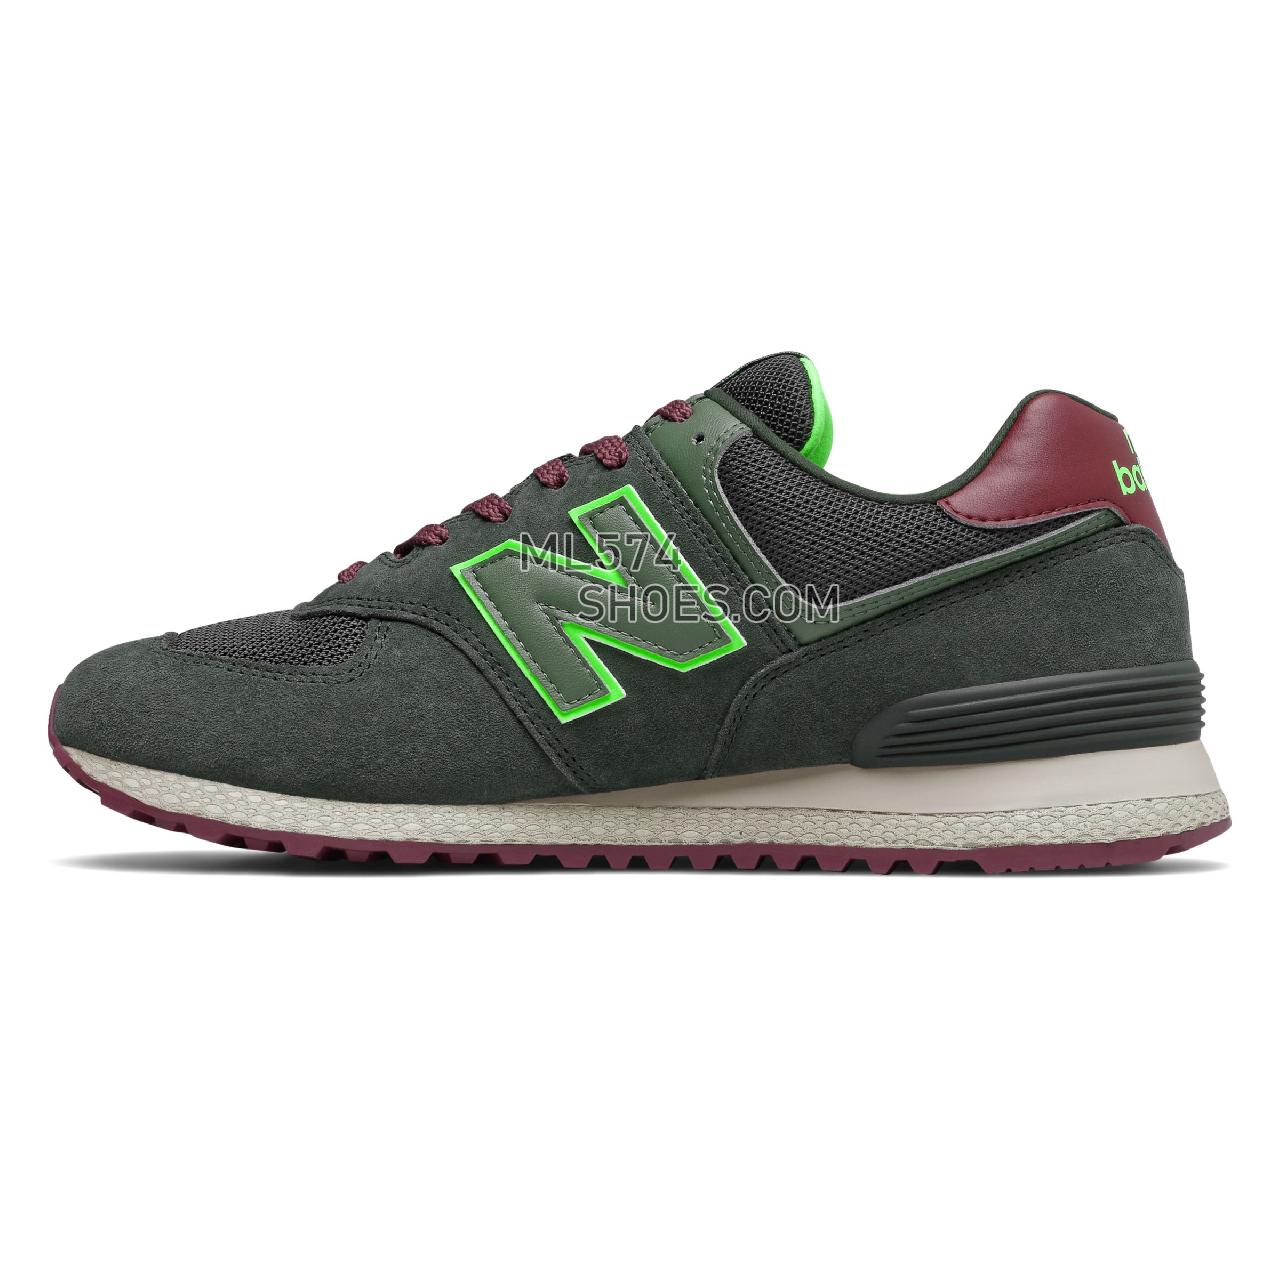 New Balance MT574V2 - Men's Classic Sneakers - Dark Olive with Energy Lime - MT574ATC